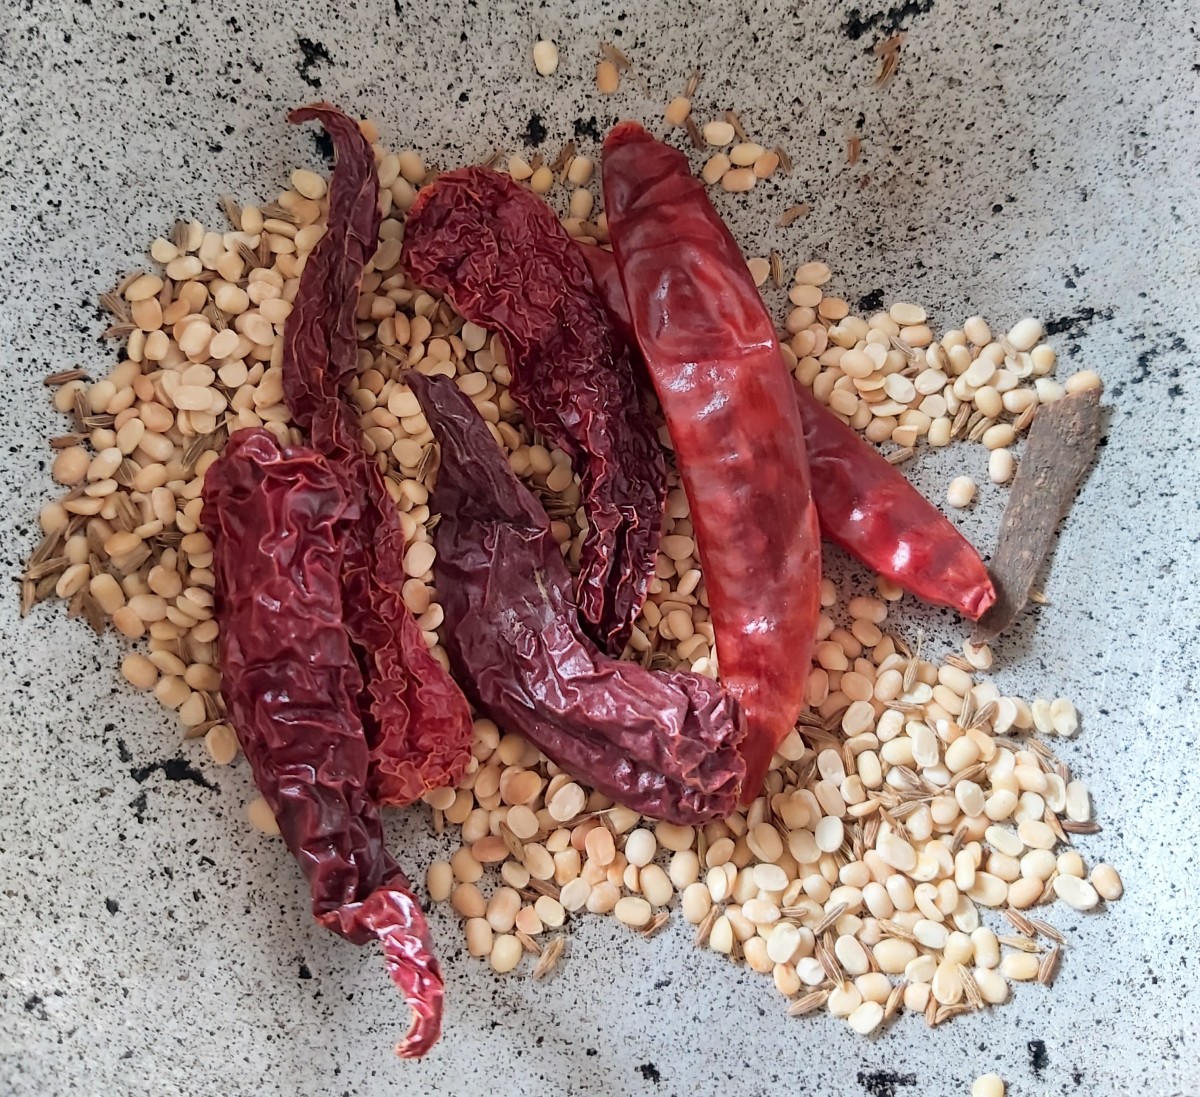 Add red chilies and fry till crisp. (I have used 1-2 guntur red chilies to give spiciness to the sambar and 4-5 byadagi red chilies to give nice color).